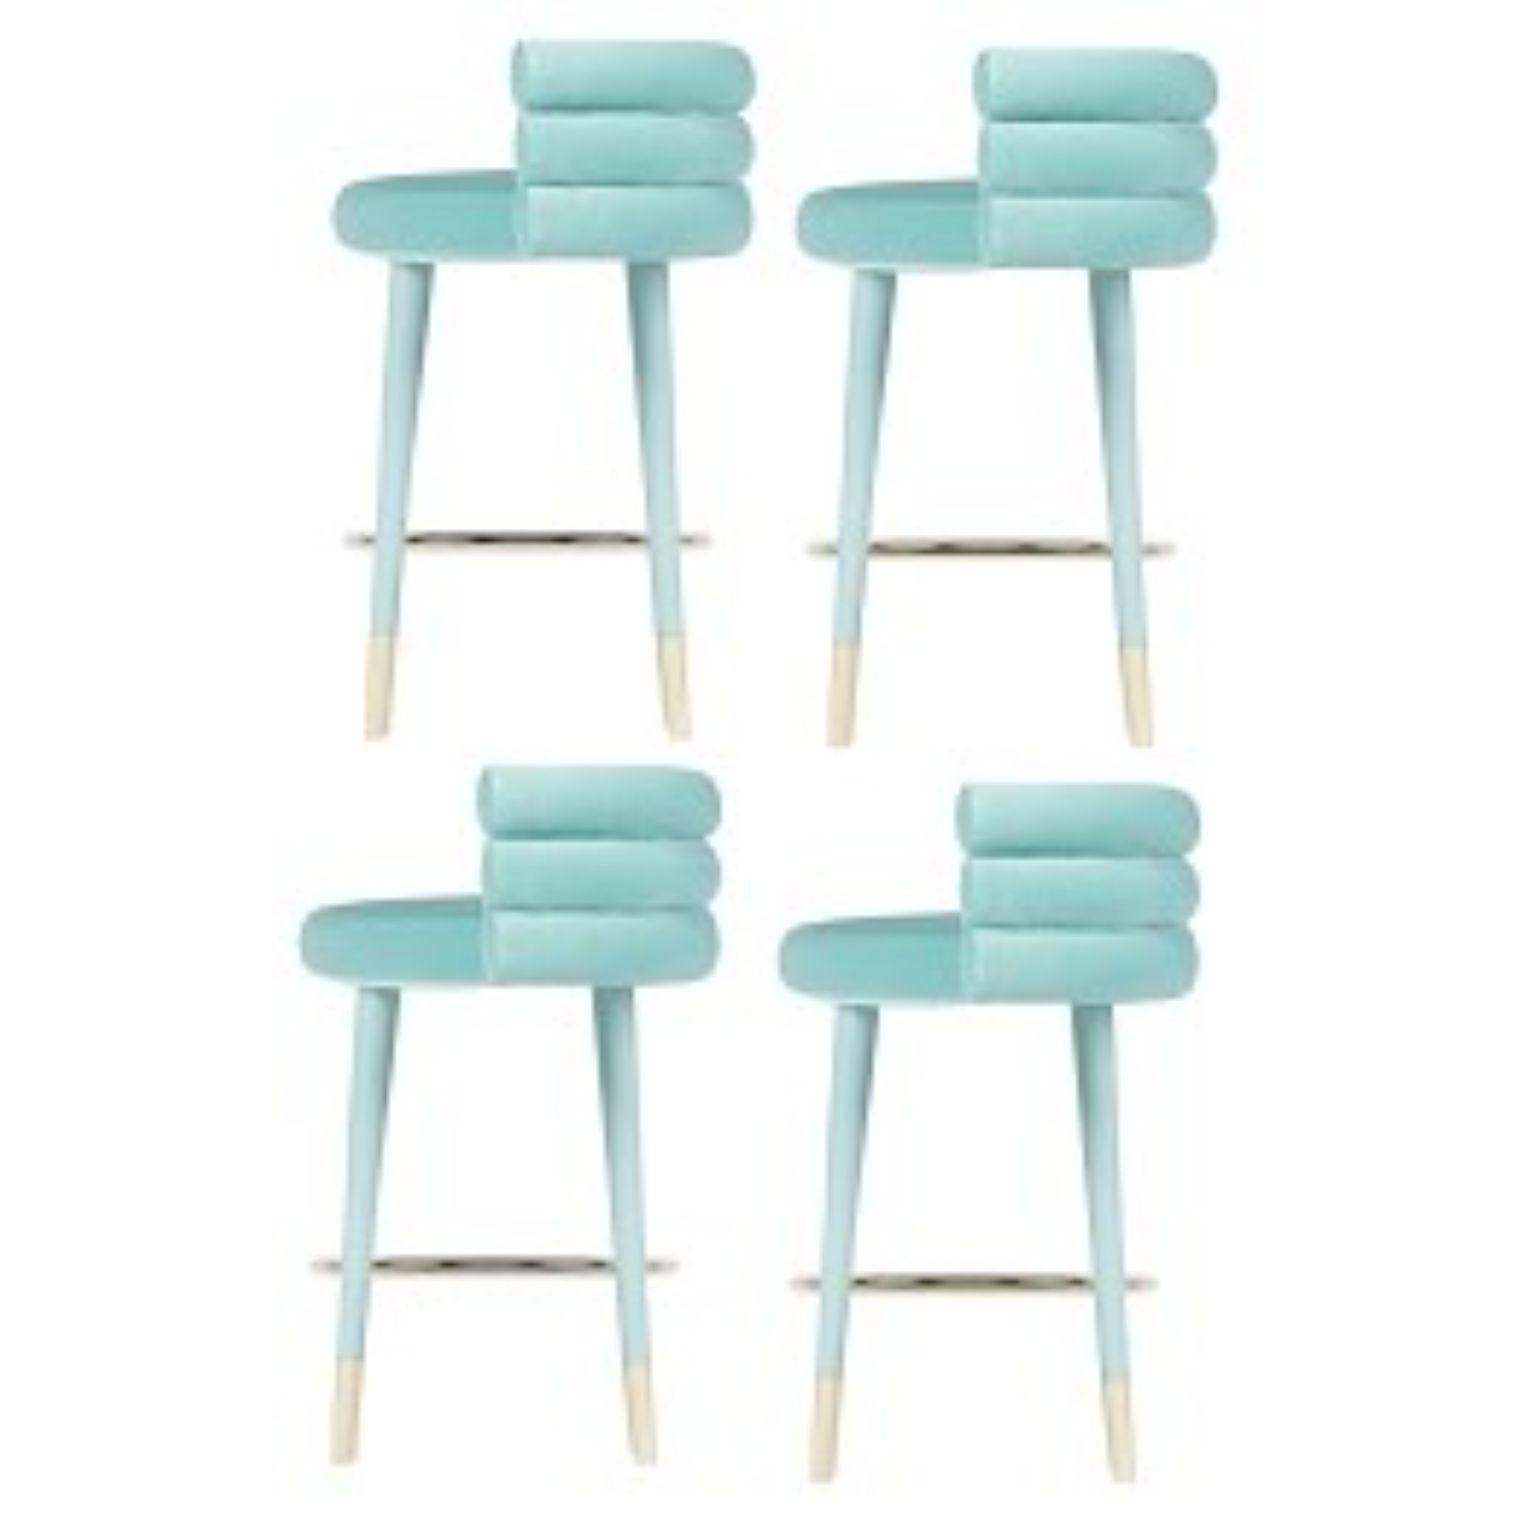 Set of 4 Marshmallow bar stools, Royal Stranger
Dimensions: 100 x 70 x 60 cm
Materials: Velvet upholstery, brass
Available in: Mint green, light pink, Royal green, and Royal red

Royal stranger is an exclusive furniture brand determined to